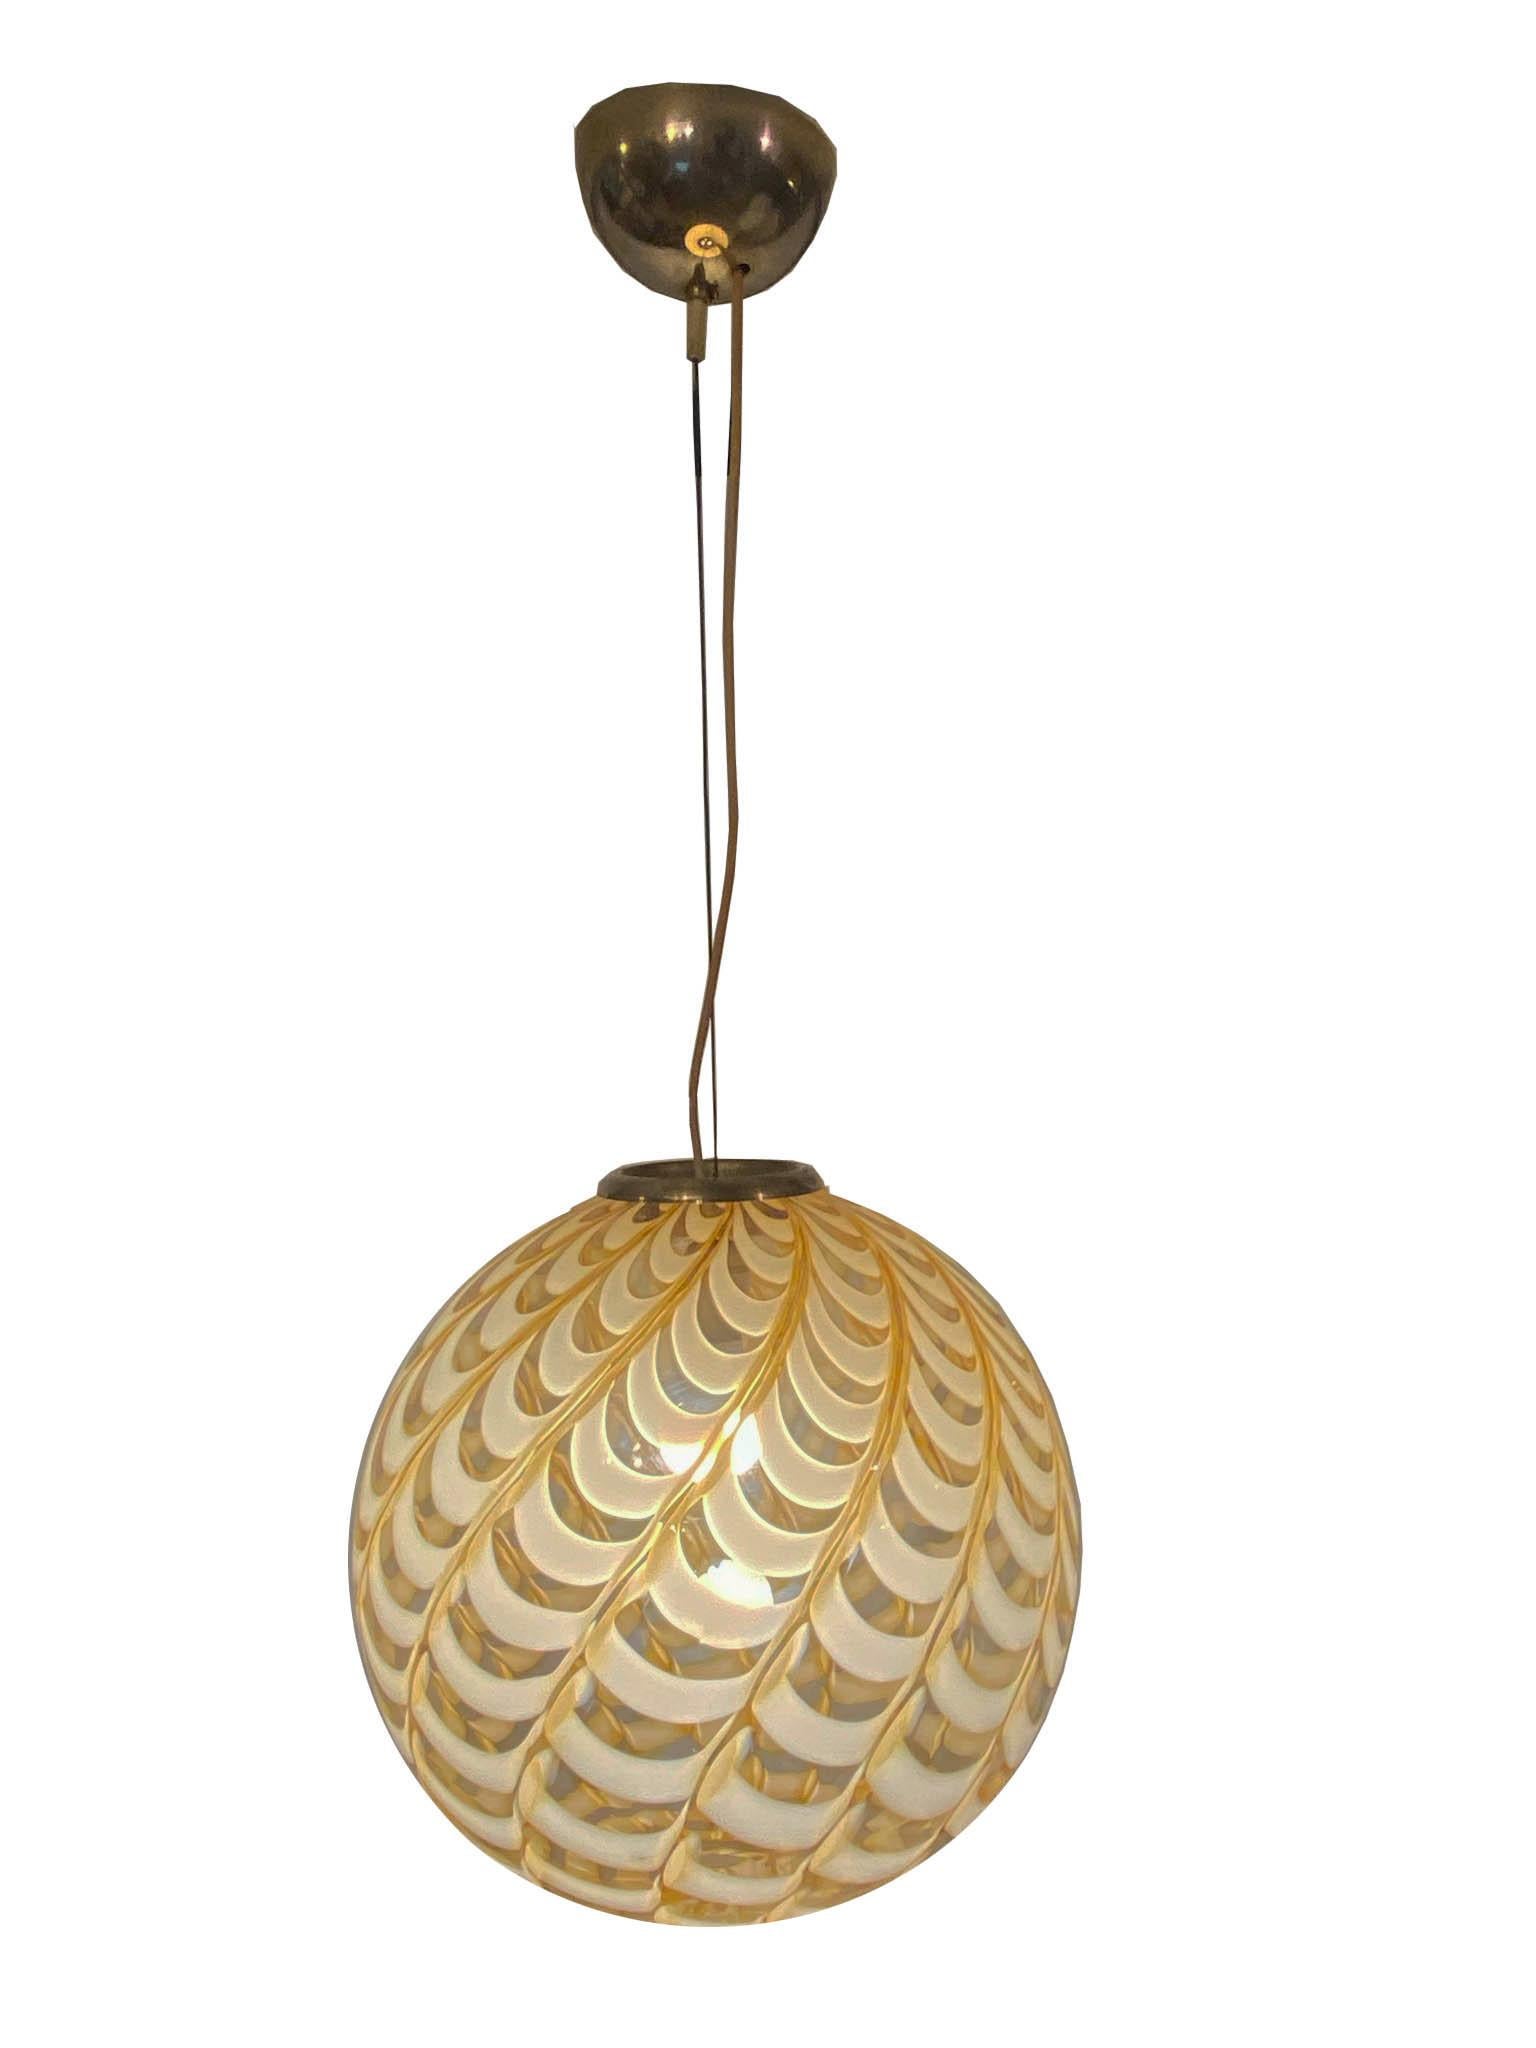 Italian Murano glass pendant lamp attributed to Venini with swirling combinations that create a beautiful wave design, in caramel color and clear glass.